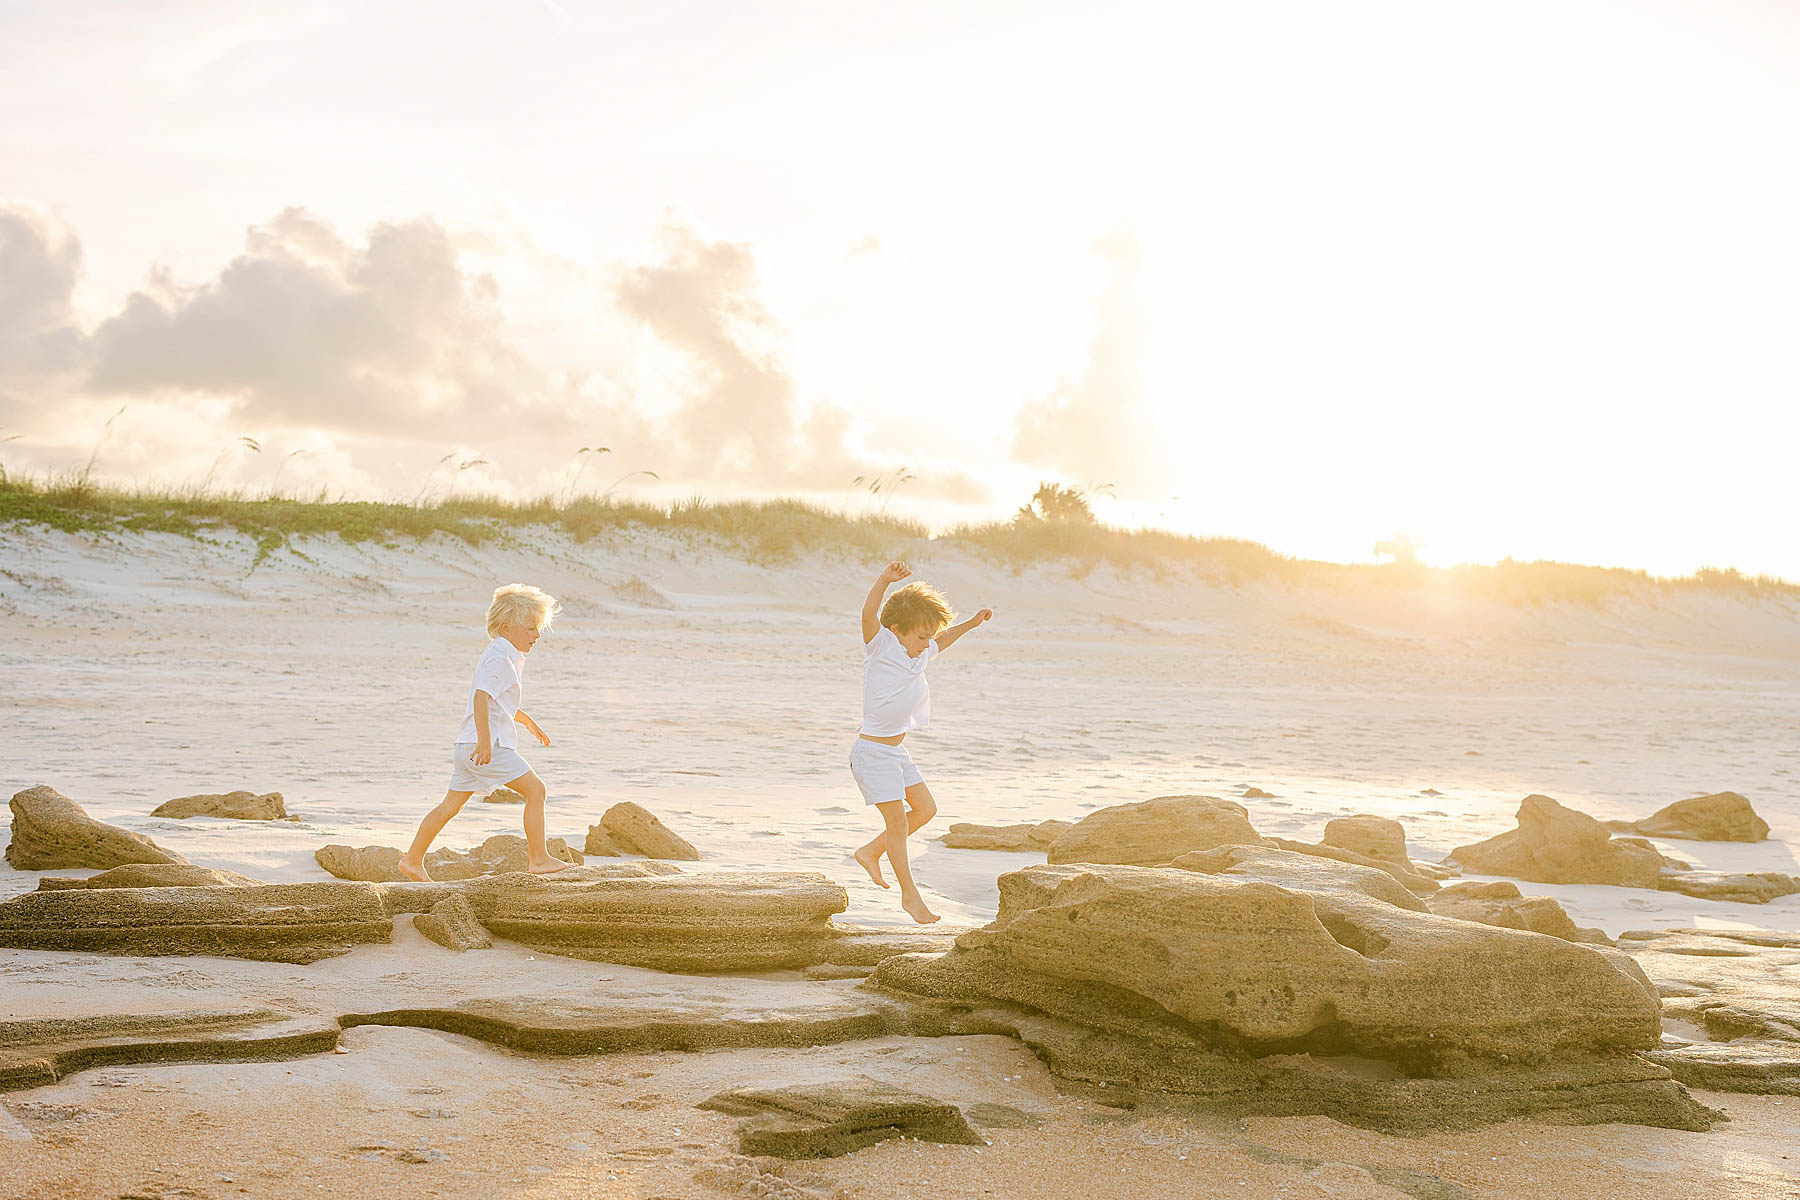 children chasing each other on the beach at sunset